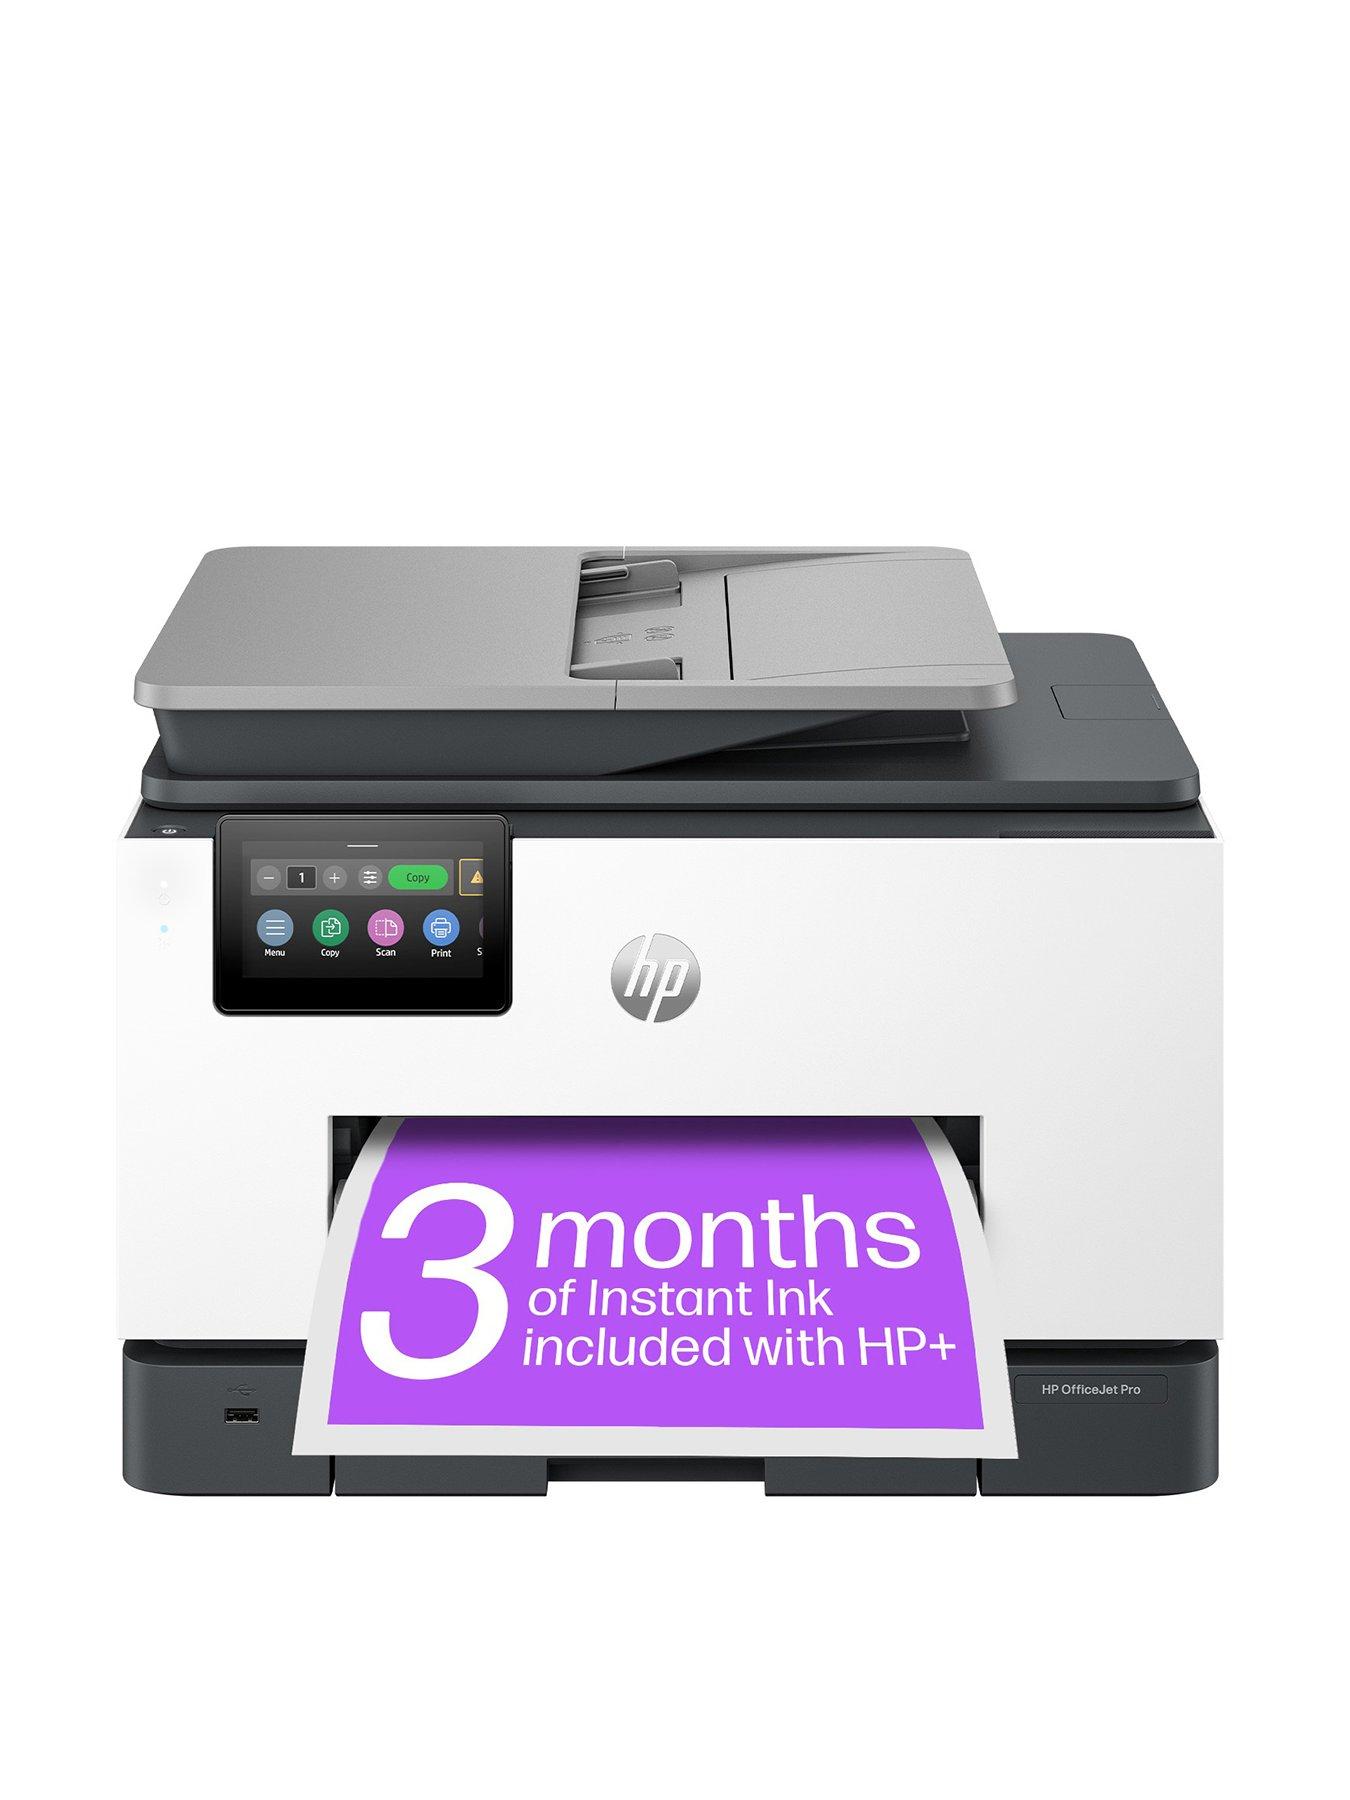 Hp Officejet Pro 9132E All-In-One Wireless Colour Printer With Fax And 3 Months Of Instant Ink Included With Hp+